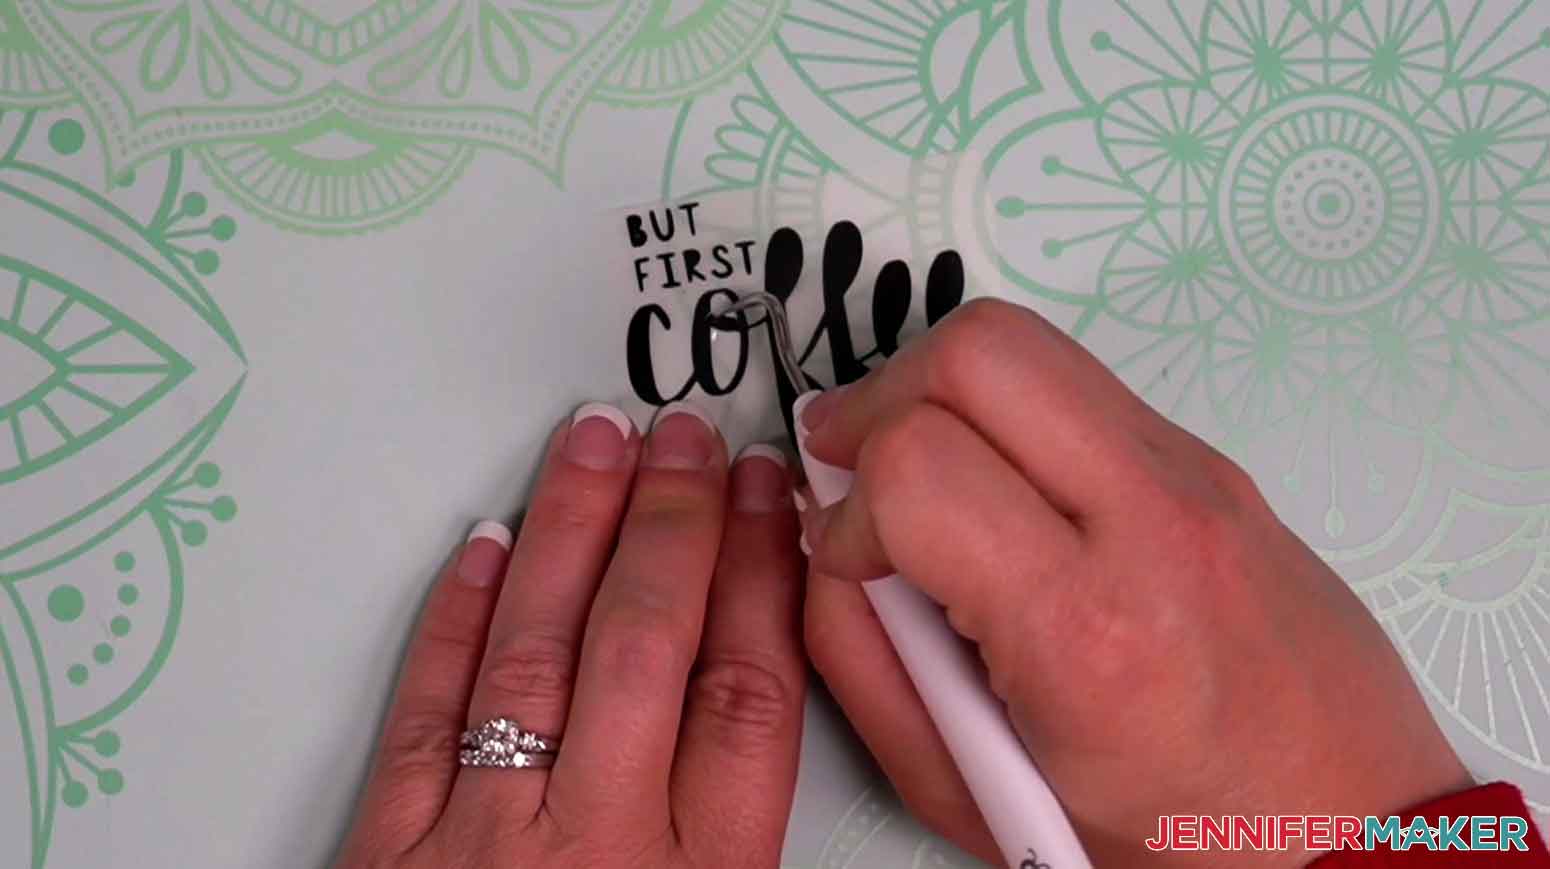 Use a weeding tool to remove excess vinyl from the coffee mug decal designs.